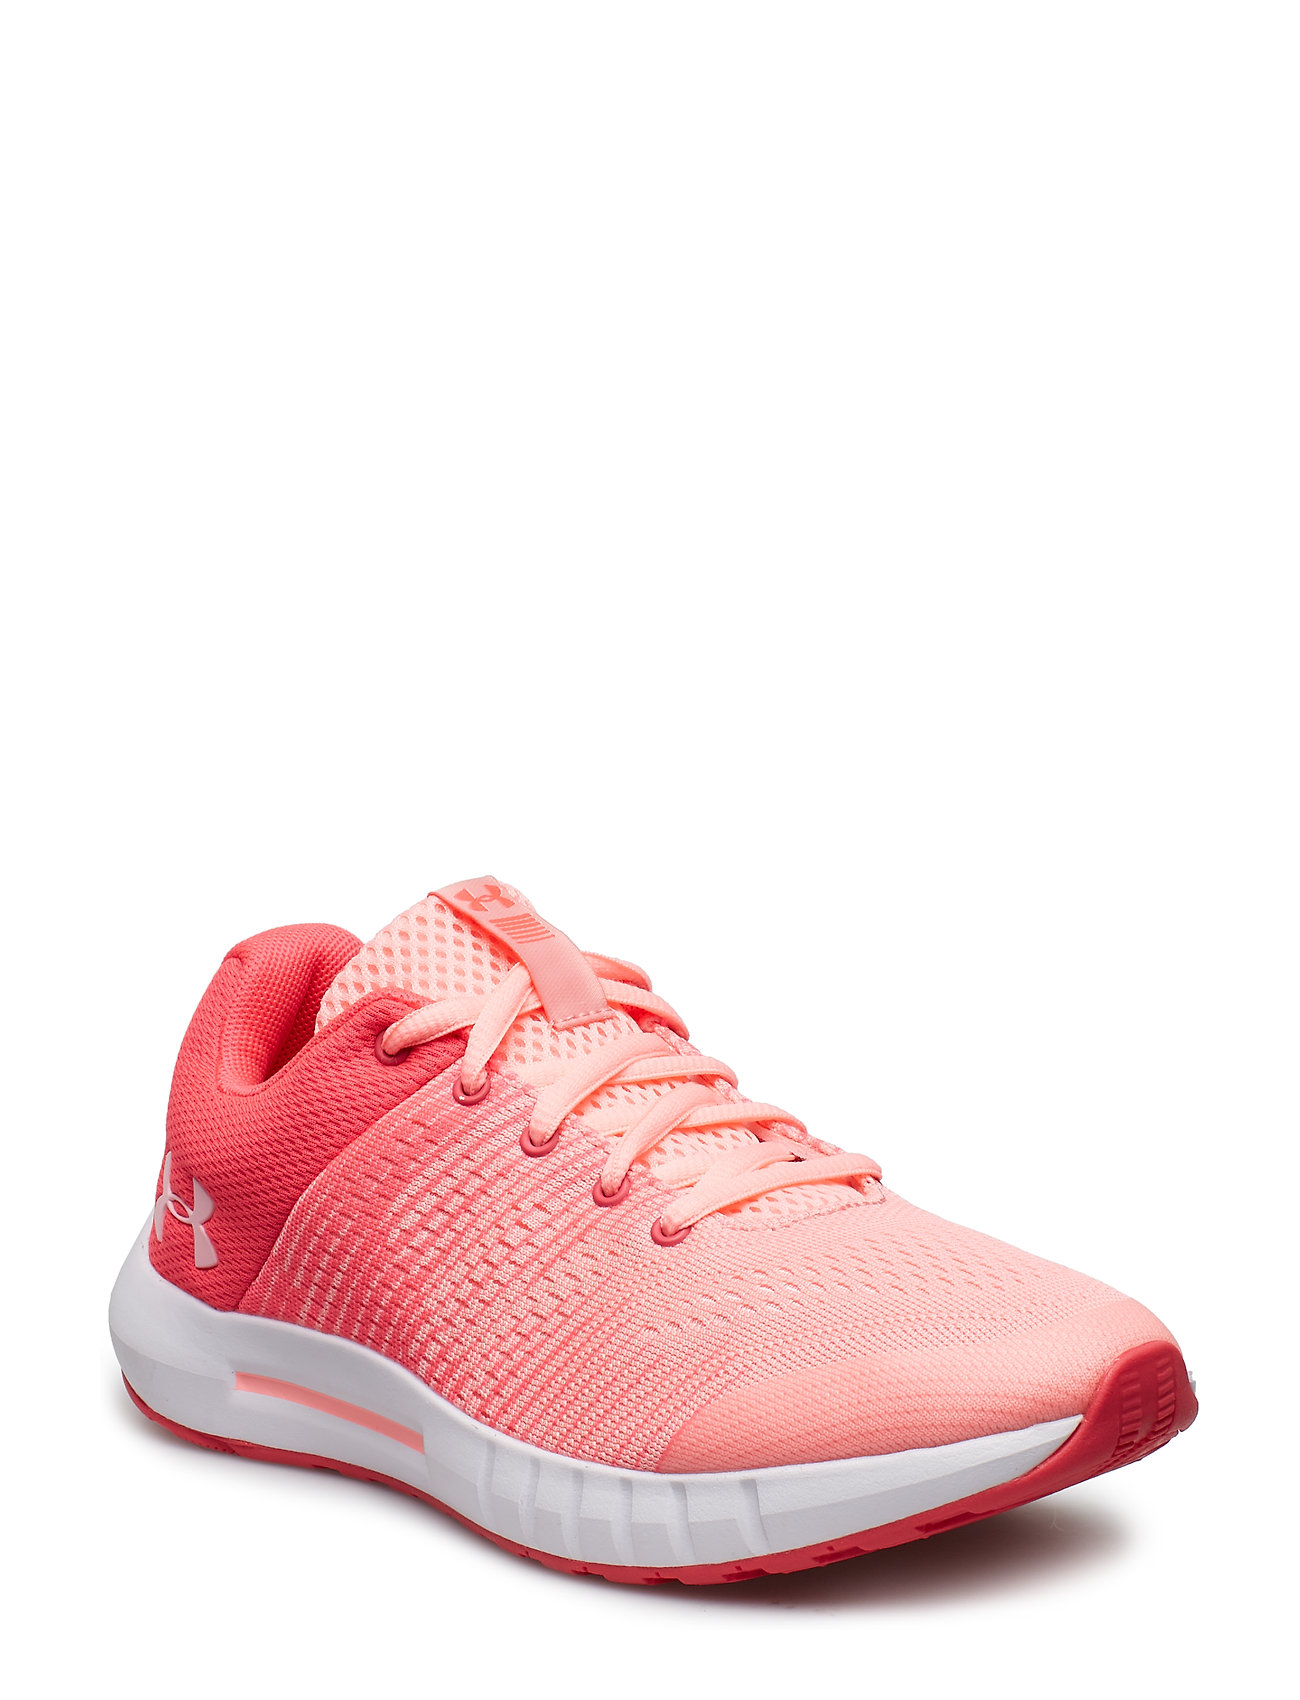 Under Armour Ua Ggs Pursuit Ng (Pink 